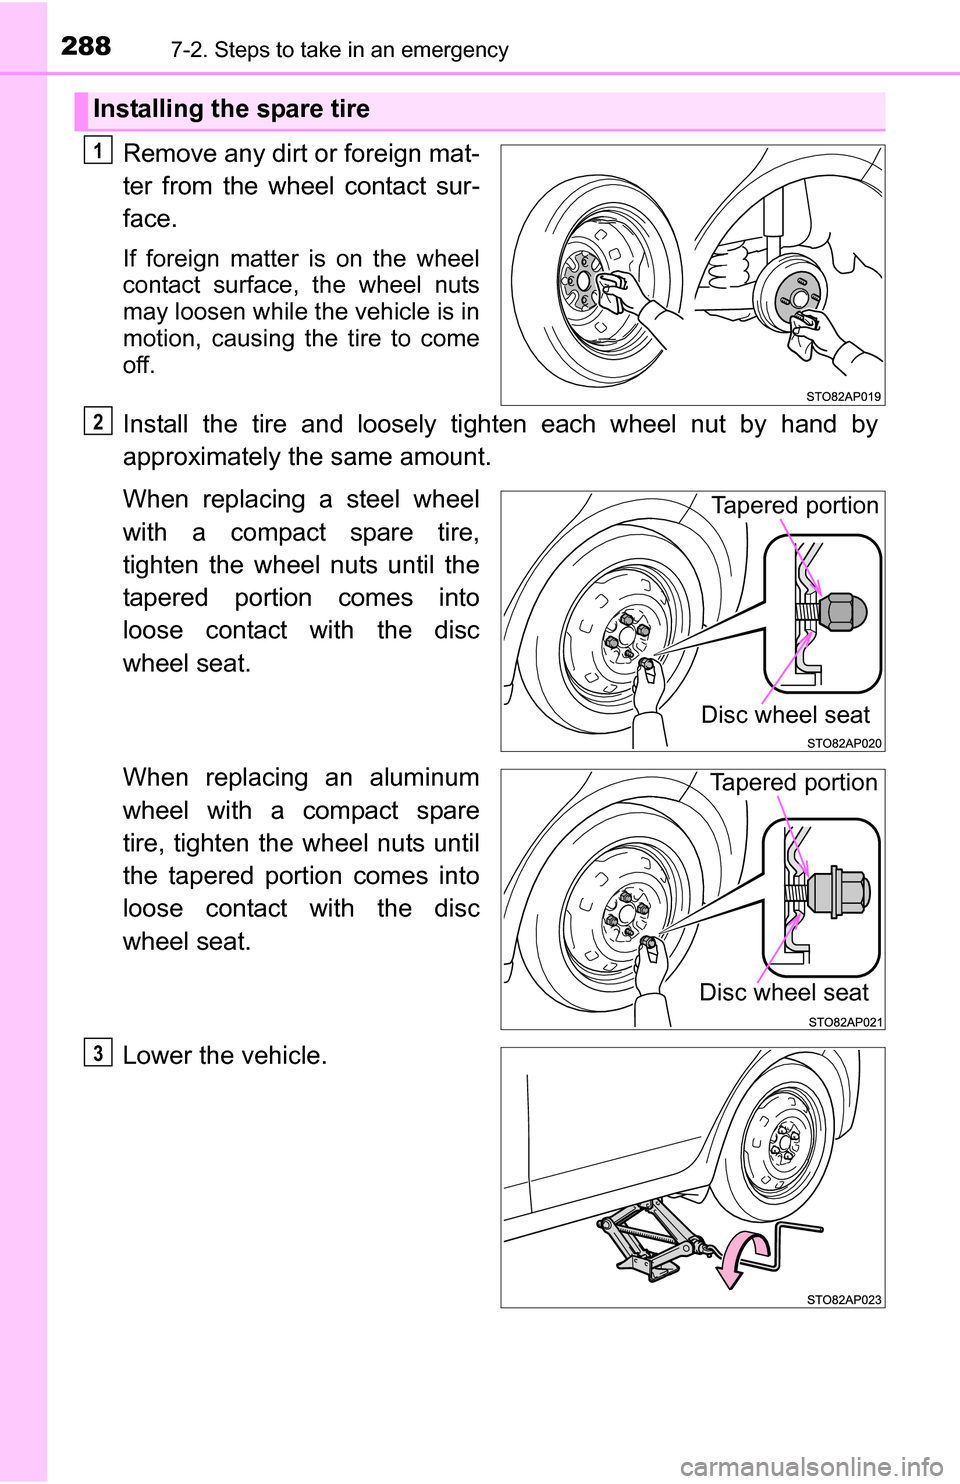 TOYOTA YARIS 2016 3.G Owners Manual 2887-2. Steps to take in an emergency
Remove any dirt or foreign mat-
ter from the wheel contact sur-
face.
If foreign matter is on the wheel
contact surface, the wheel nuts
may loosen while the vehic